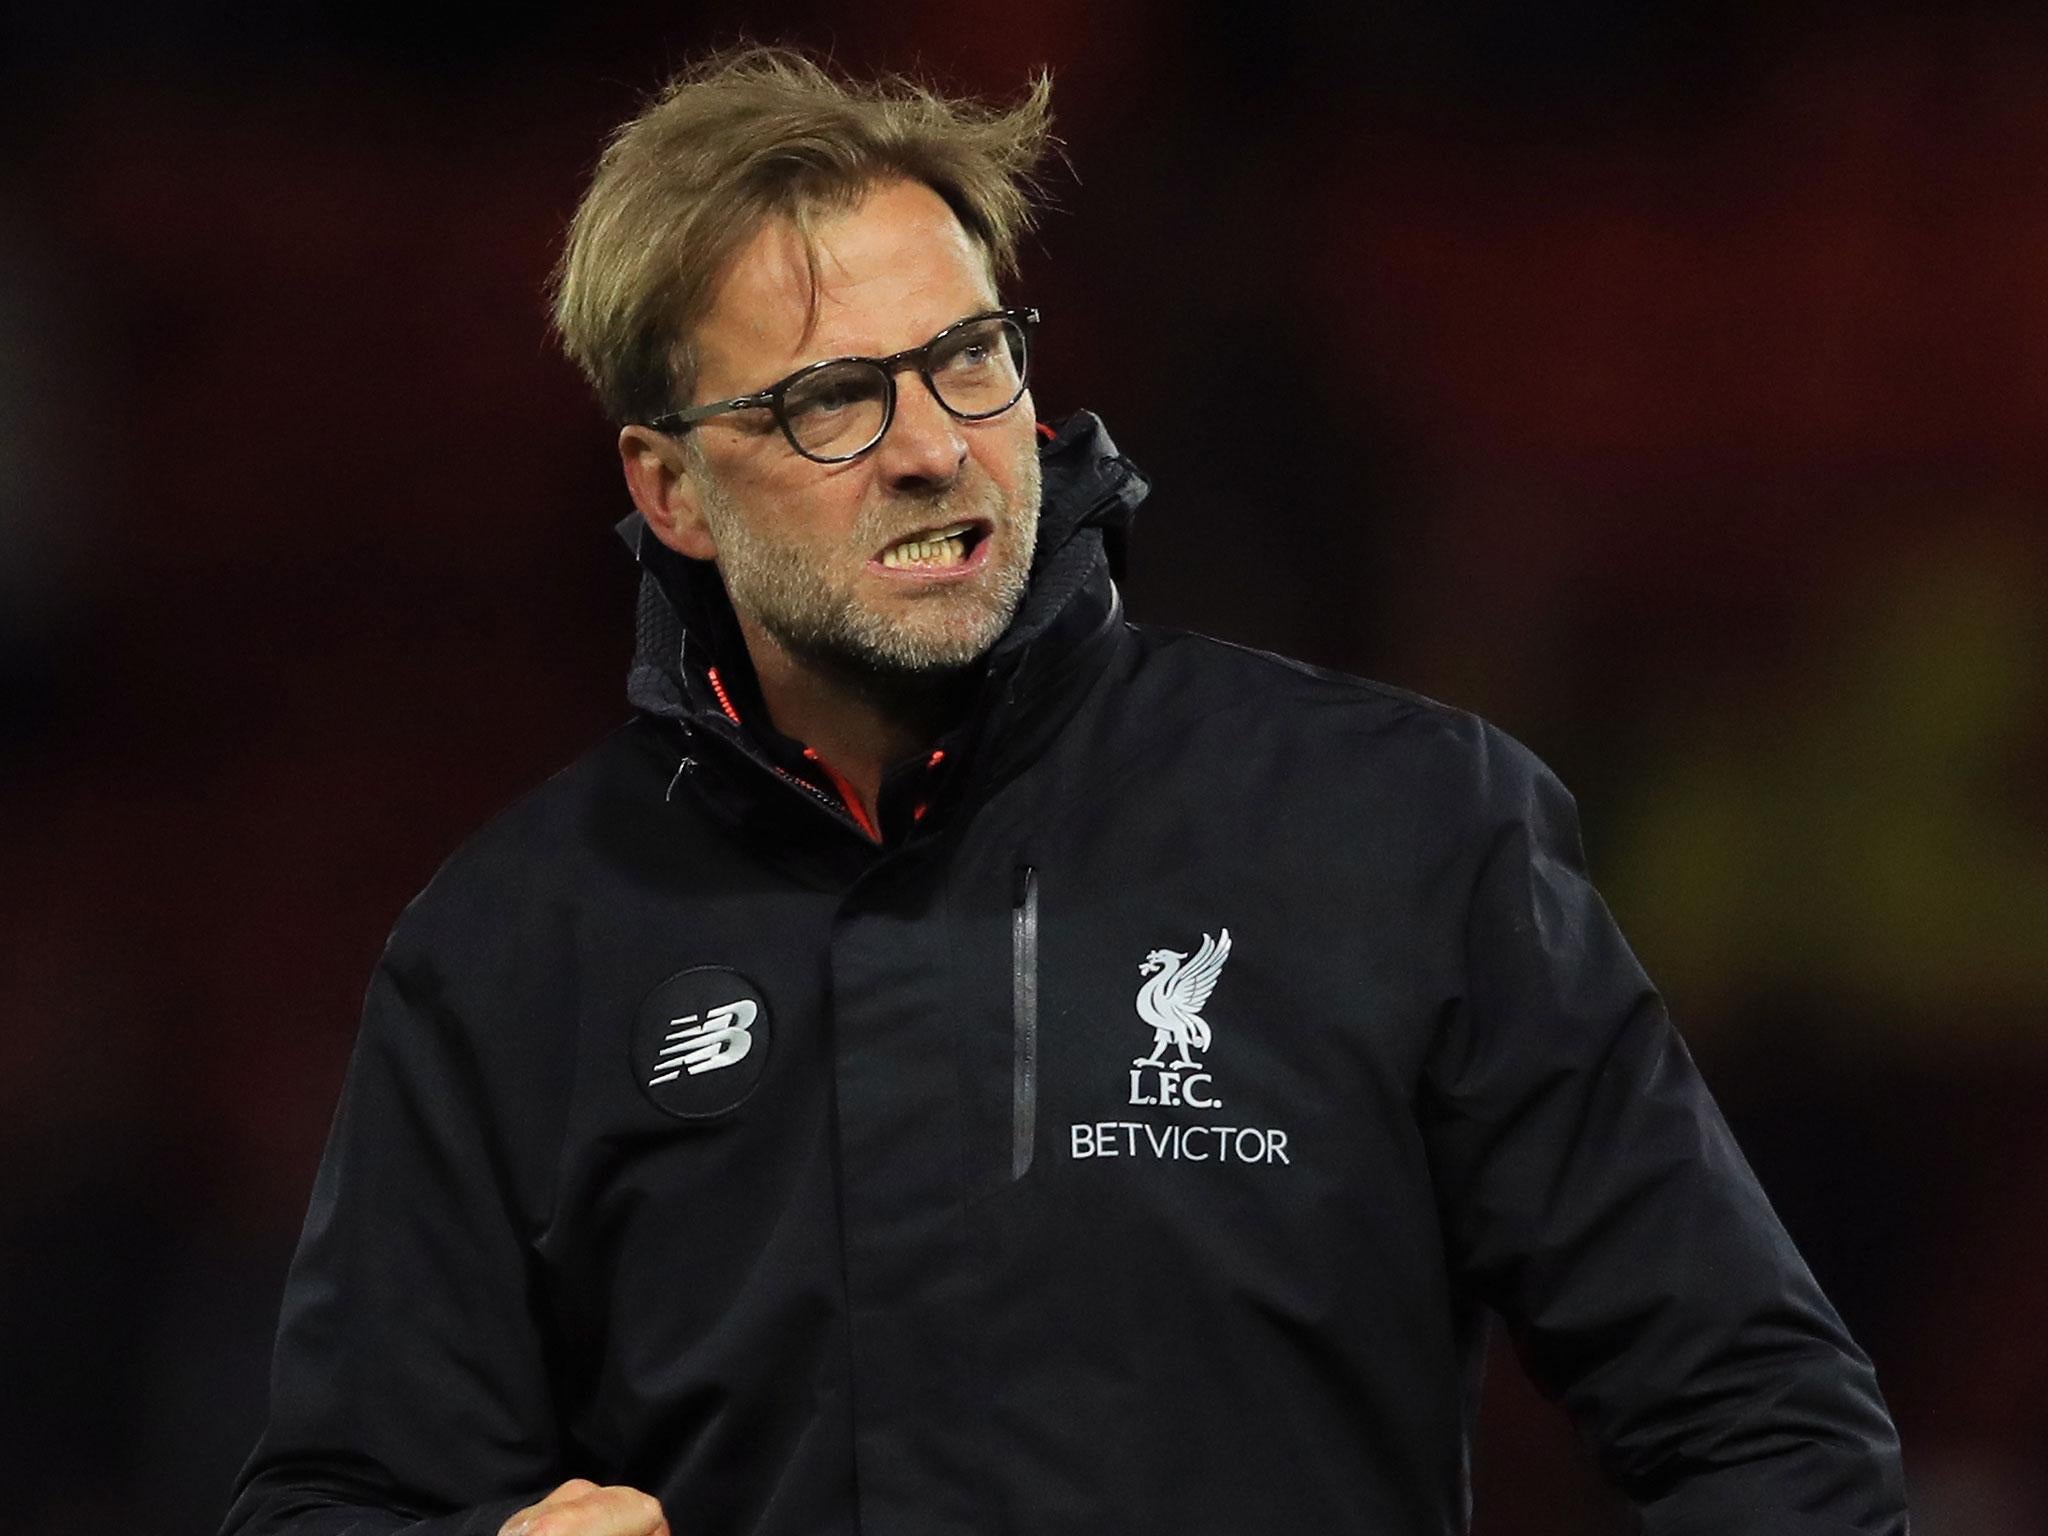 Jurgen Klopp knows there's work still to be done